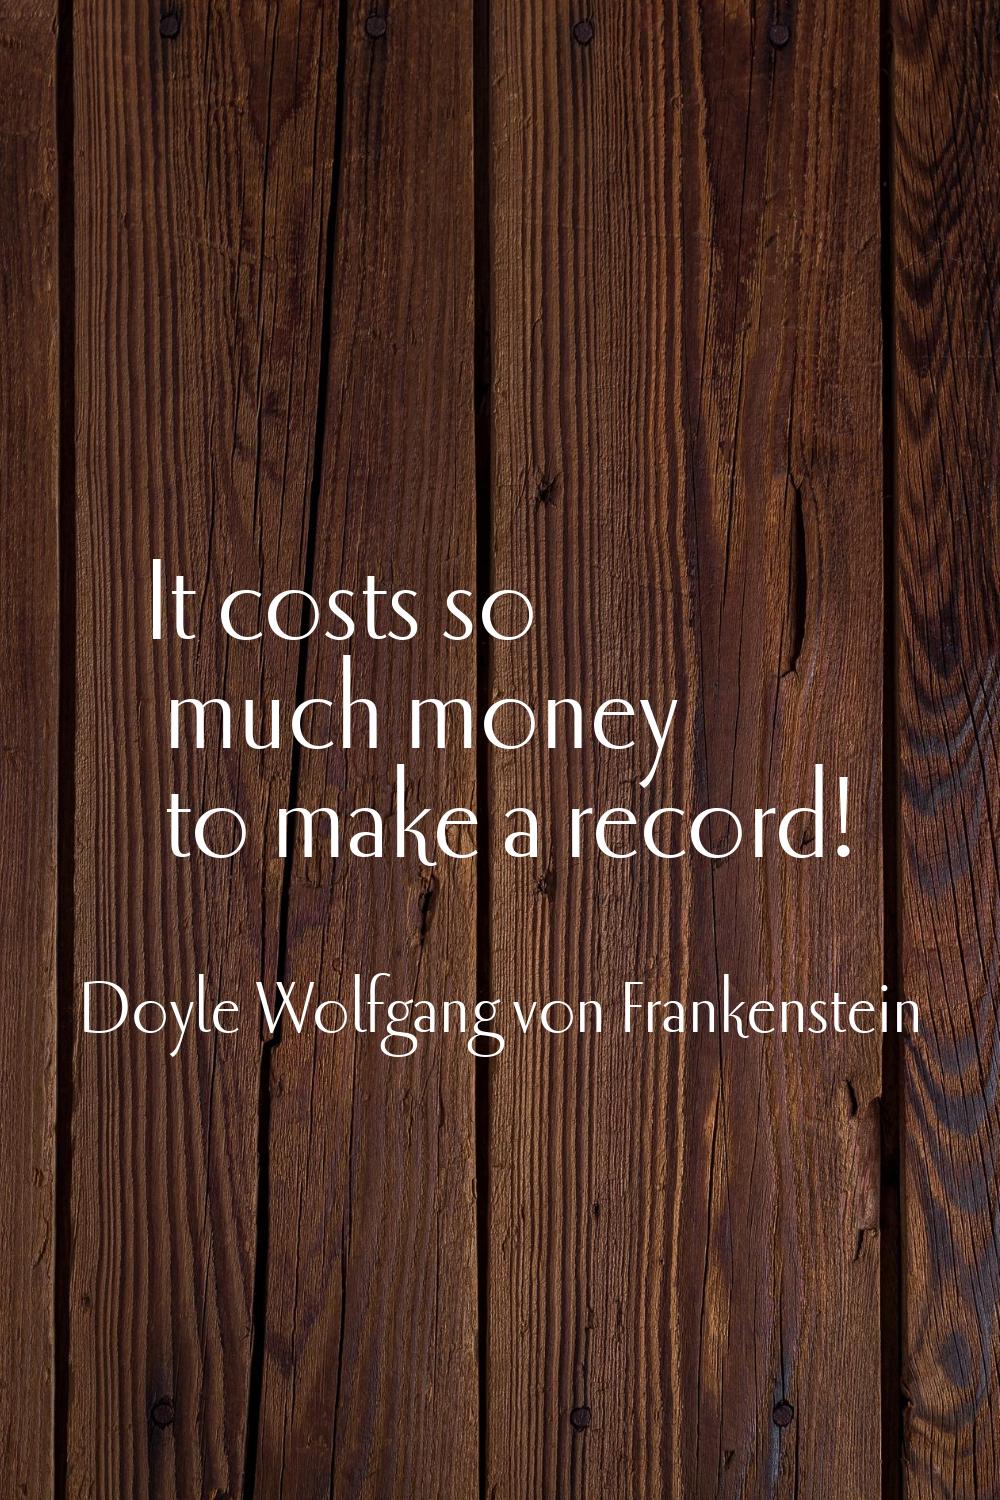 It costs so much money to make a record!